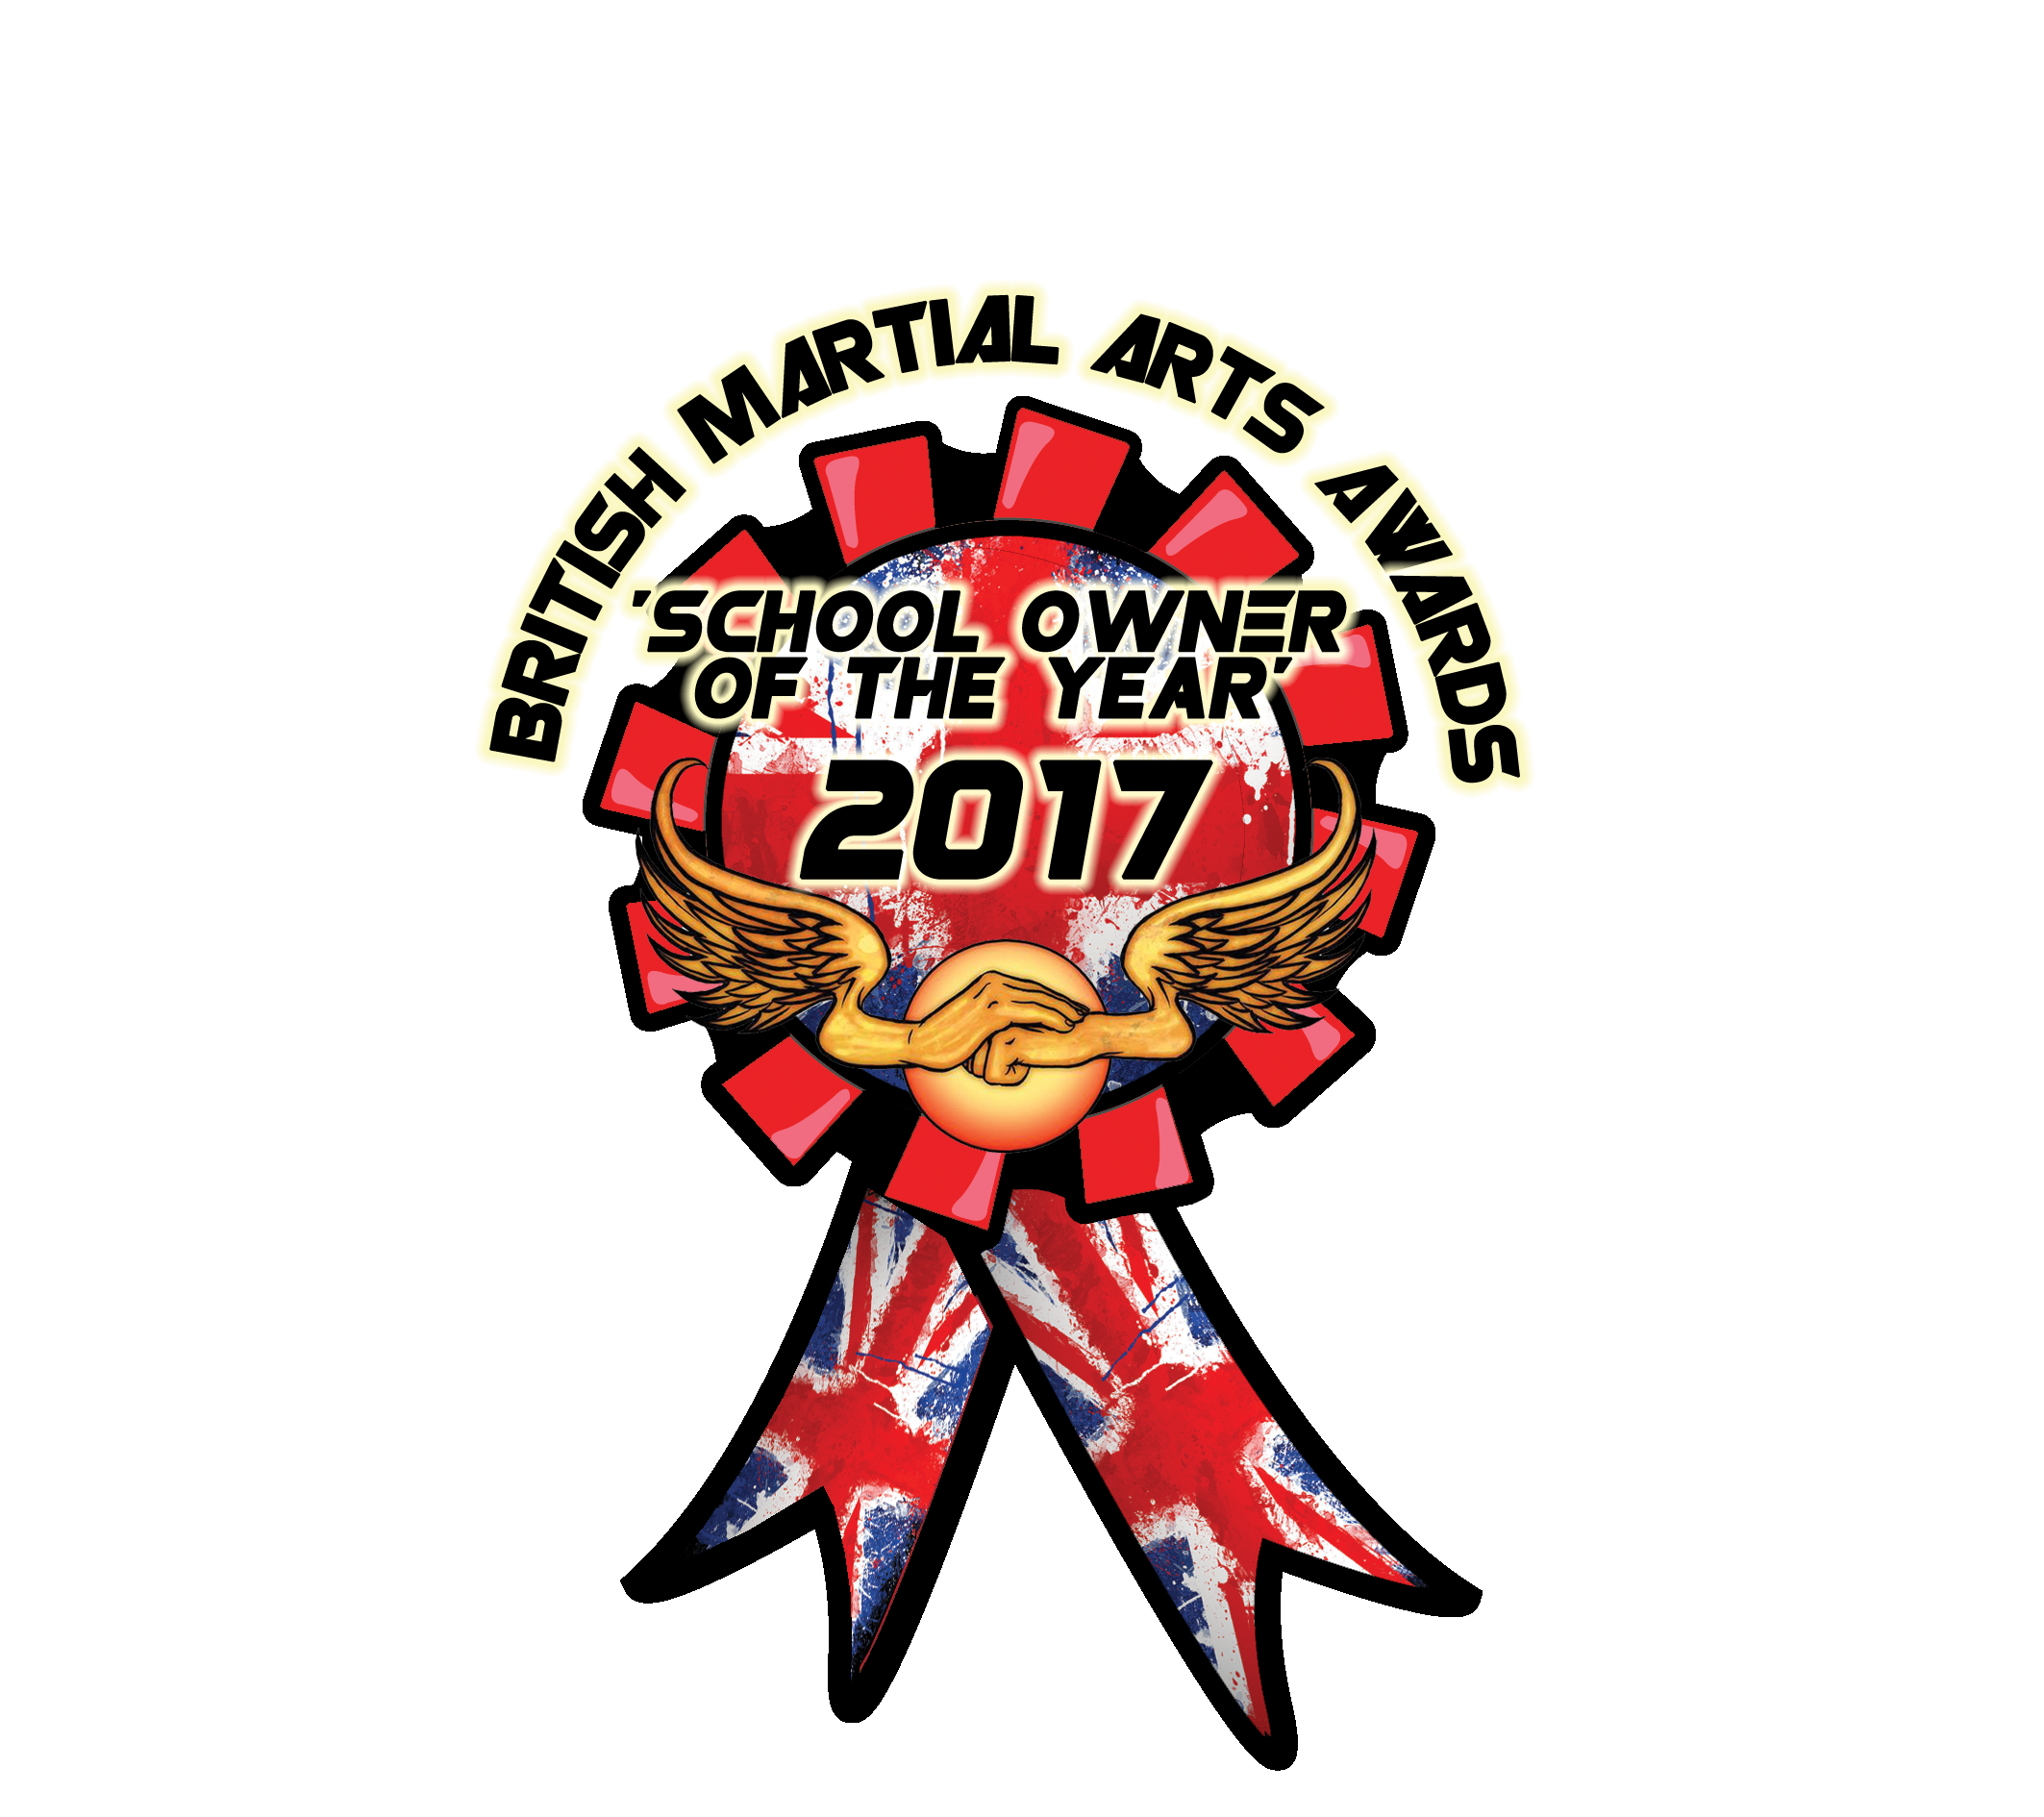 School Owner of the Year 2017